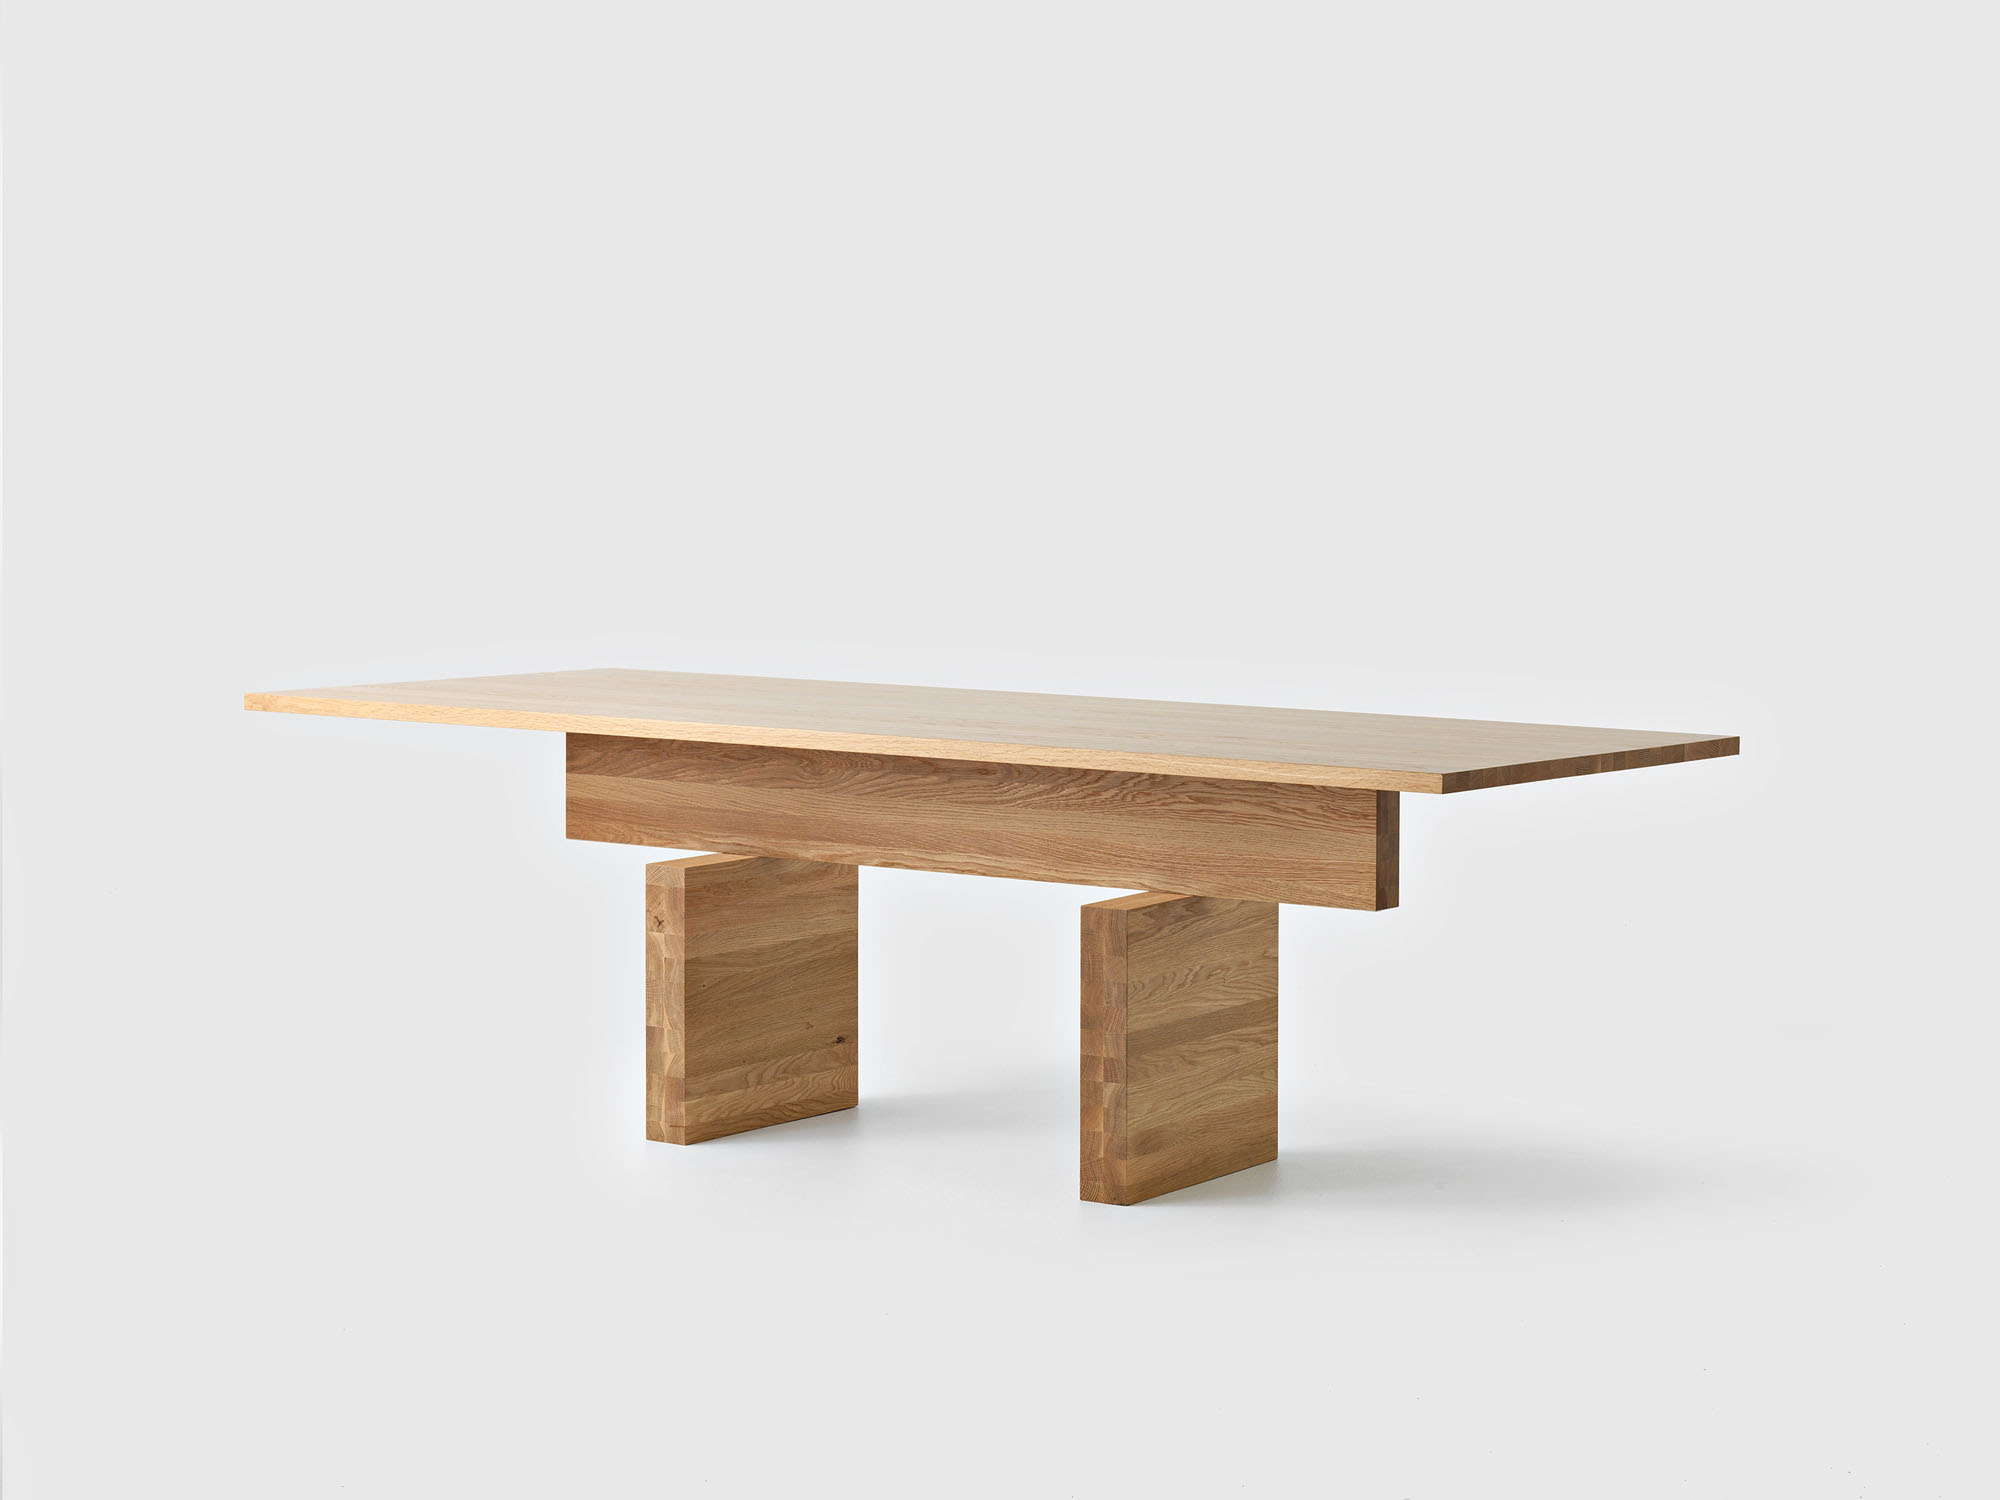 A wooden table that can be taken apart